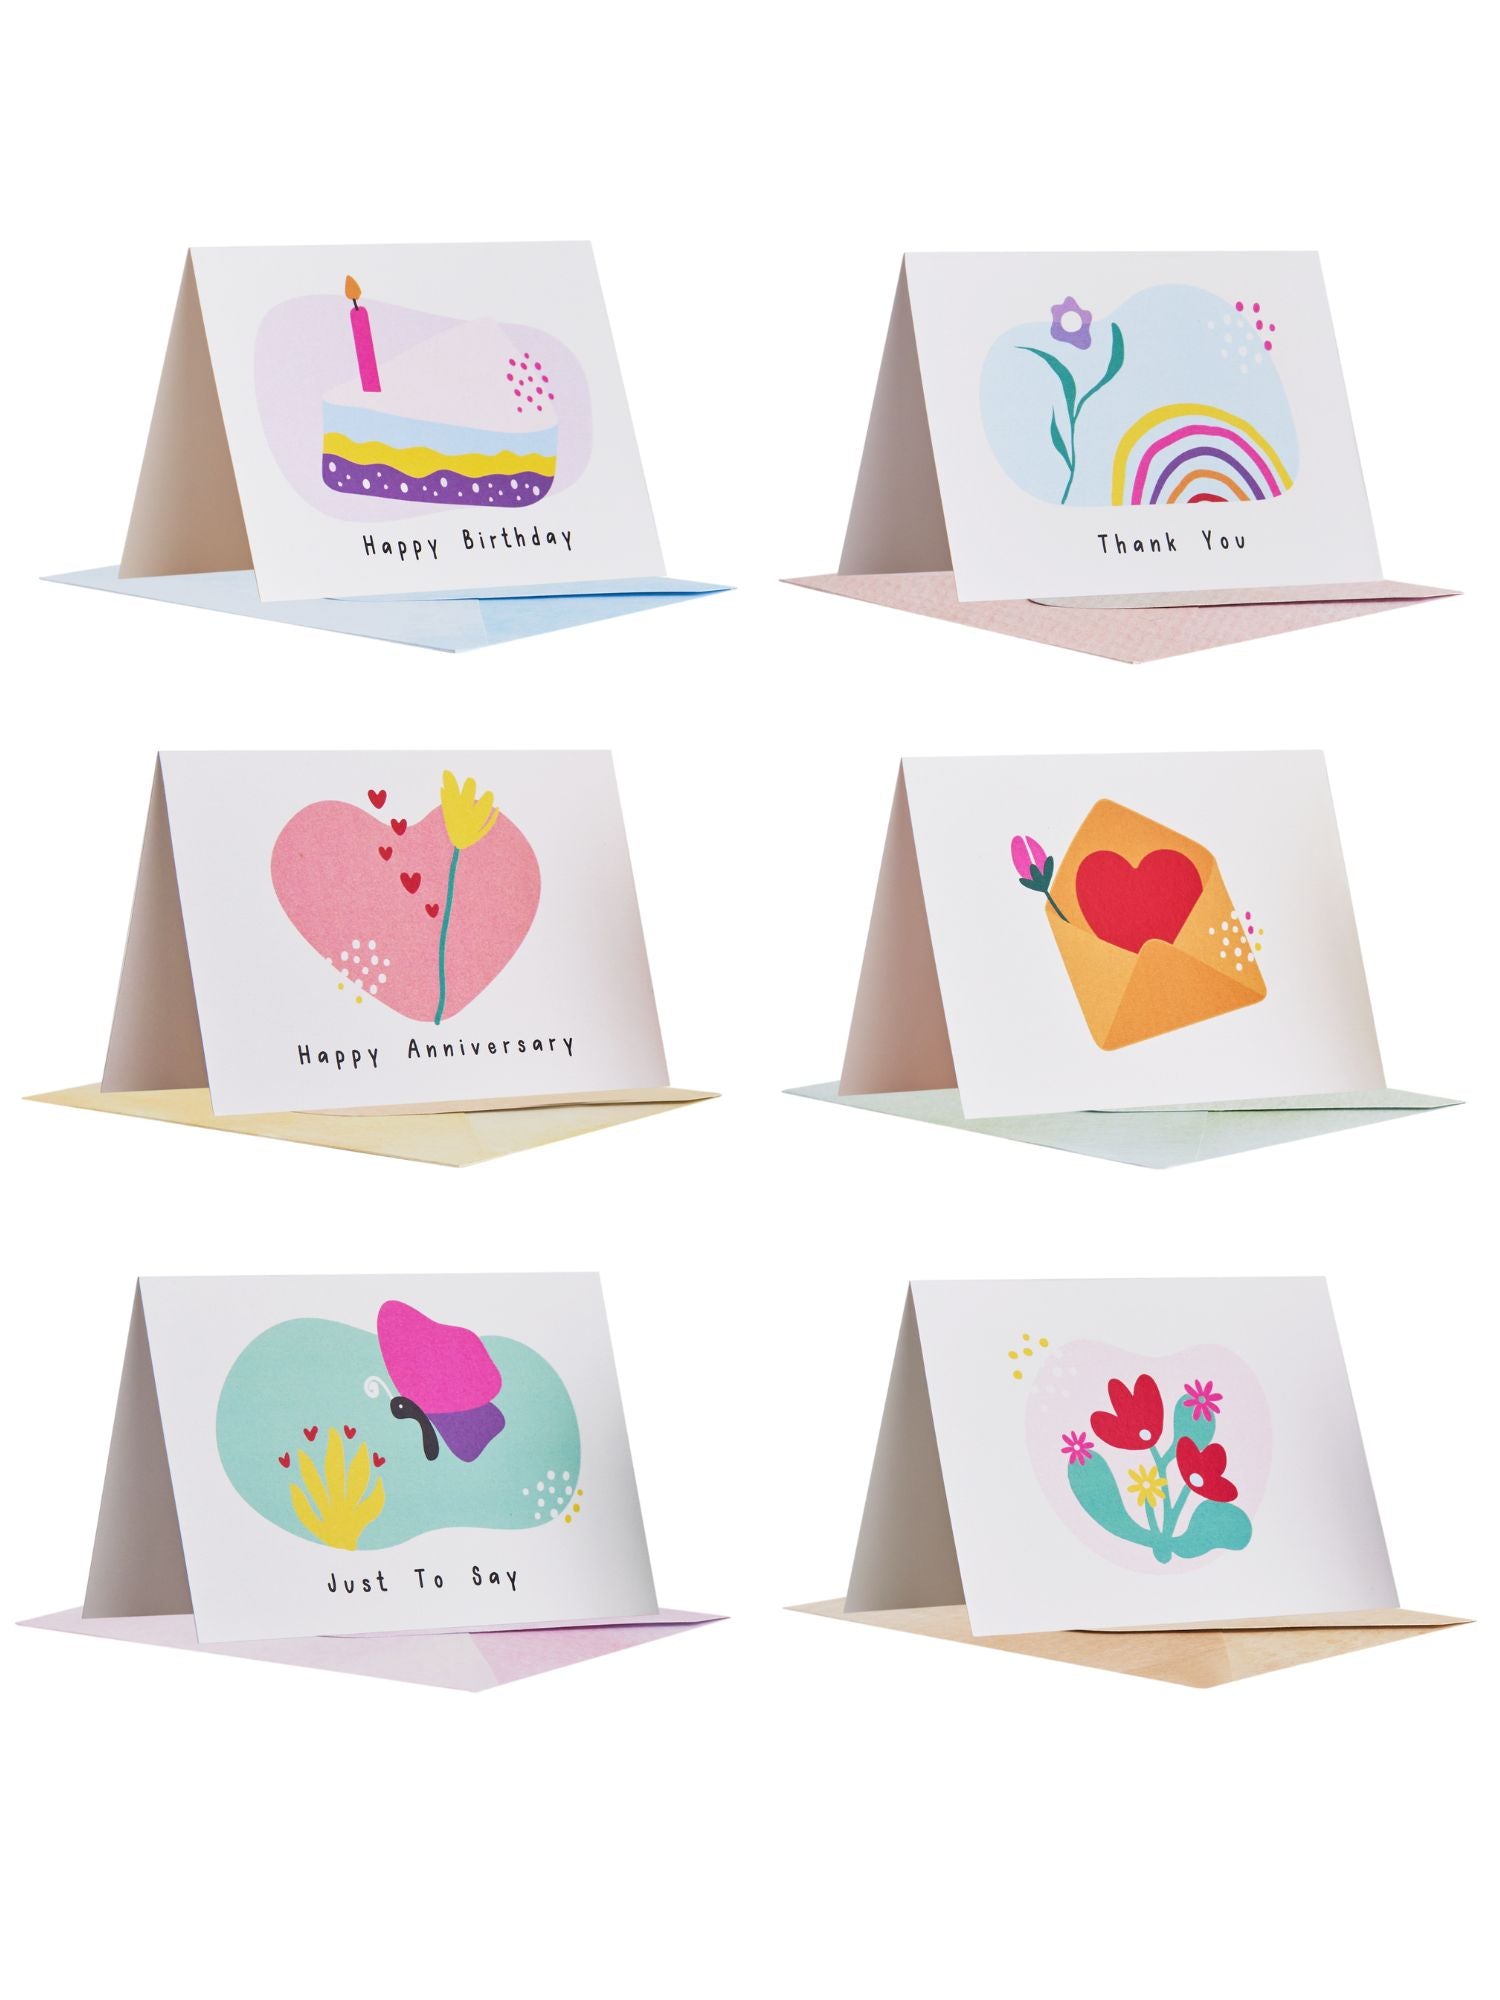 Doodle Set of 12 Blank Notecards with Coloured Envelopes and Jacket Style Packaging (Abstract Notes)